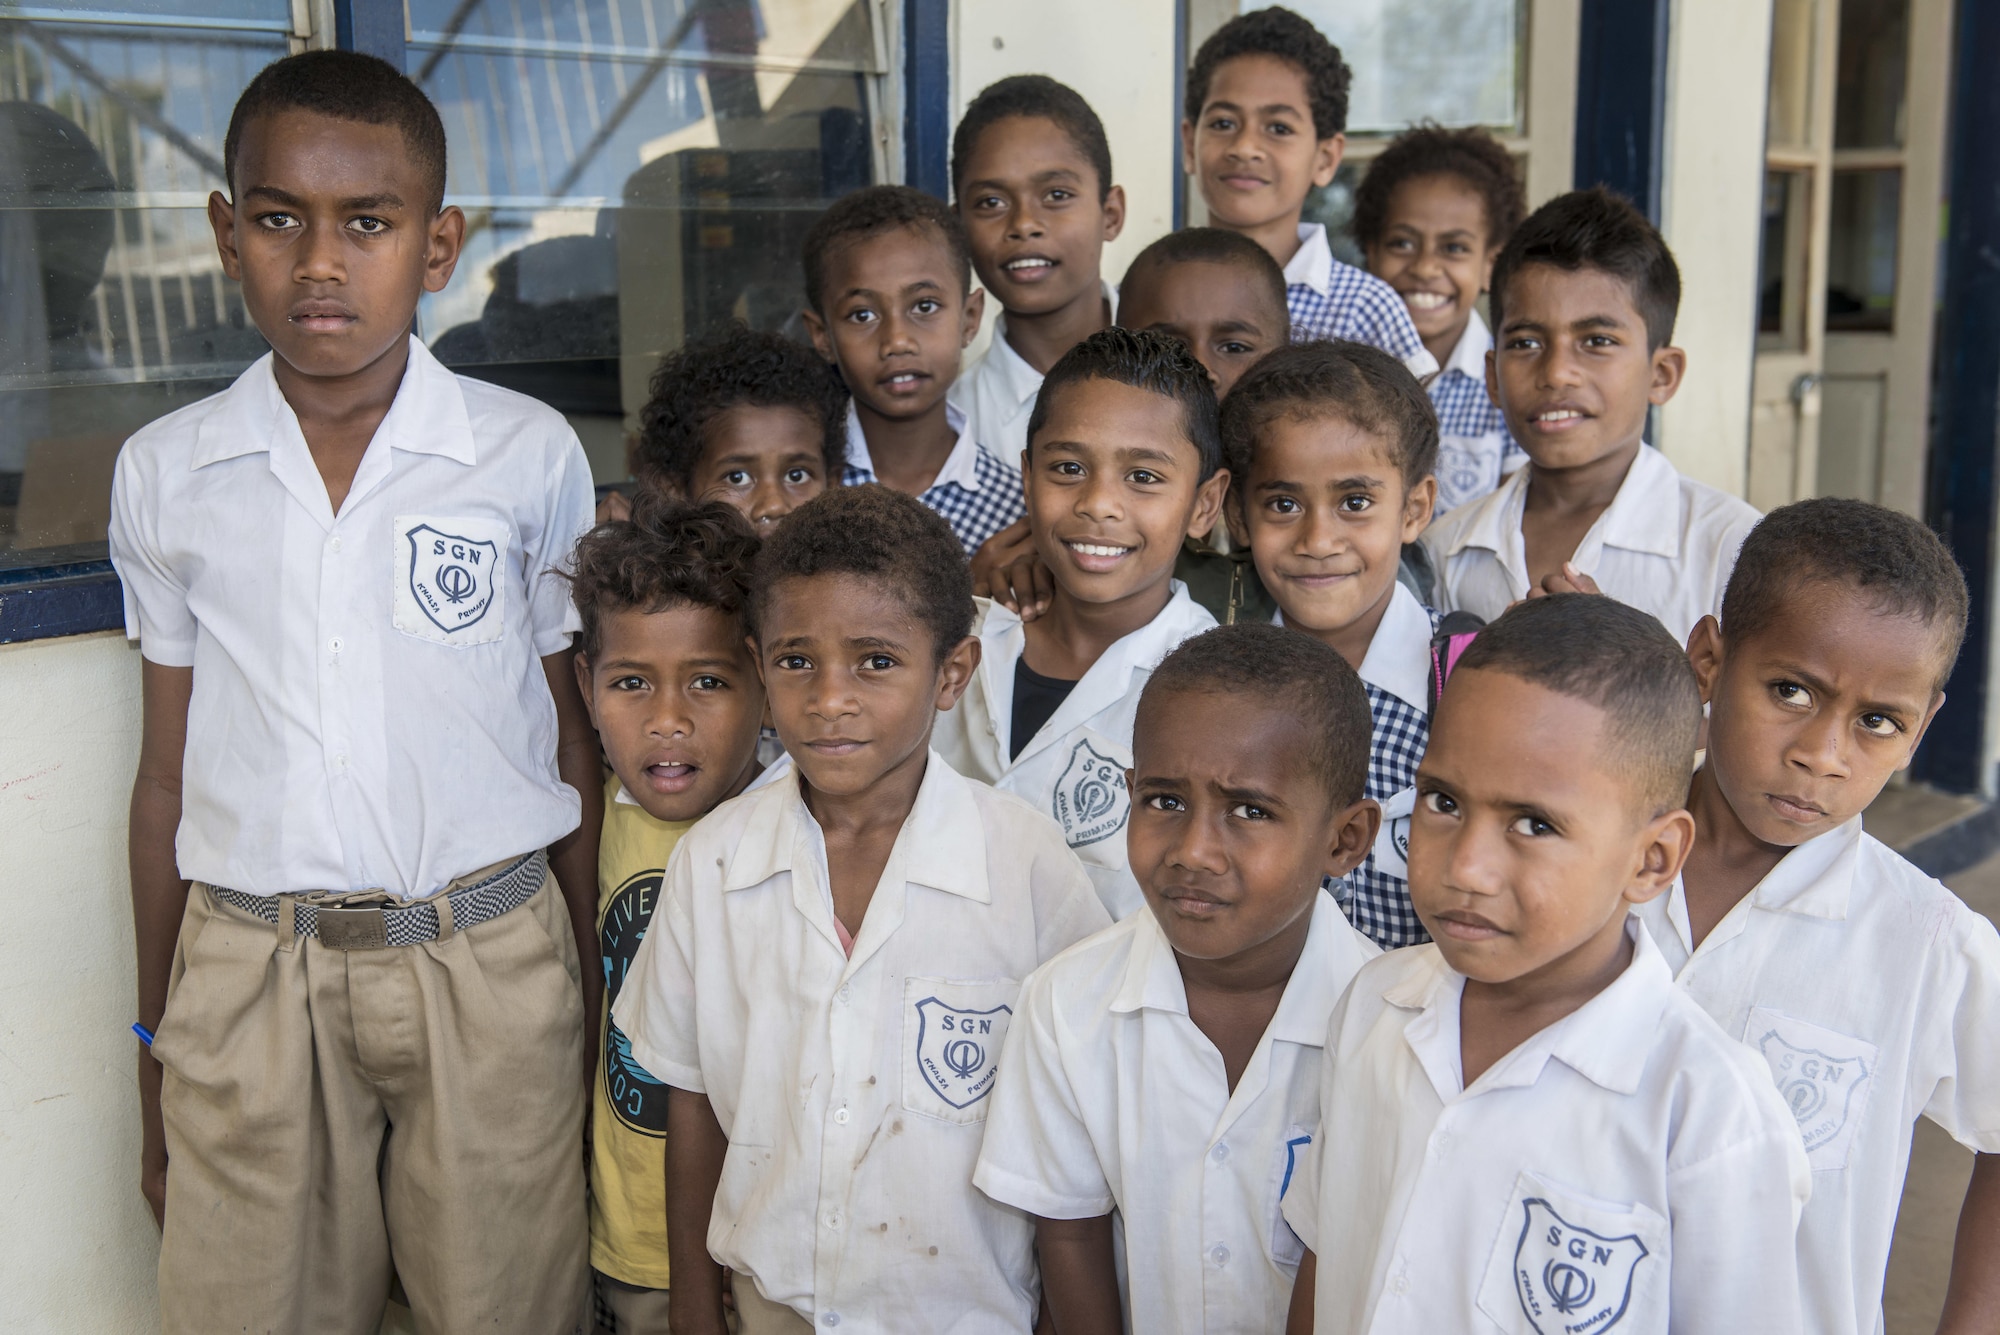 A group of Fijian students pose for the camera at Khalsa Primary School during Pacific Angel (PACANGEL) 17-3 in Ba, Fiji, July 18, 2017. The kids were joined by several U.S. and Fijian engineers working together to install new and renovate existing infrastructure such as ceiling fans and water piping. PACANGEL builds partnerships between the US, Fiji, and several regional nations by conducting multilateral humanitarian assistance and civil military operations, promoting regional military-civilian-nongovernmental organization cooperation and interoperability. (U.S. Air Force photo/Tech. Sgt. Benjamin W. Stratton)